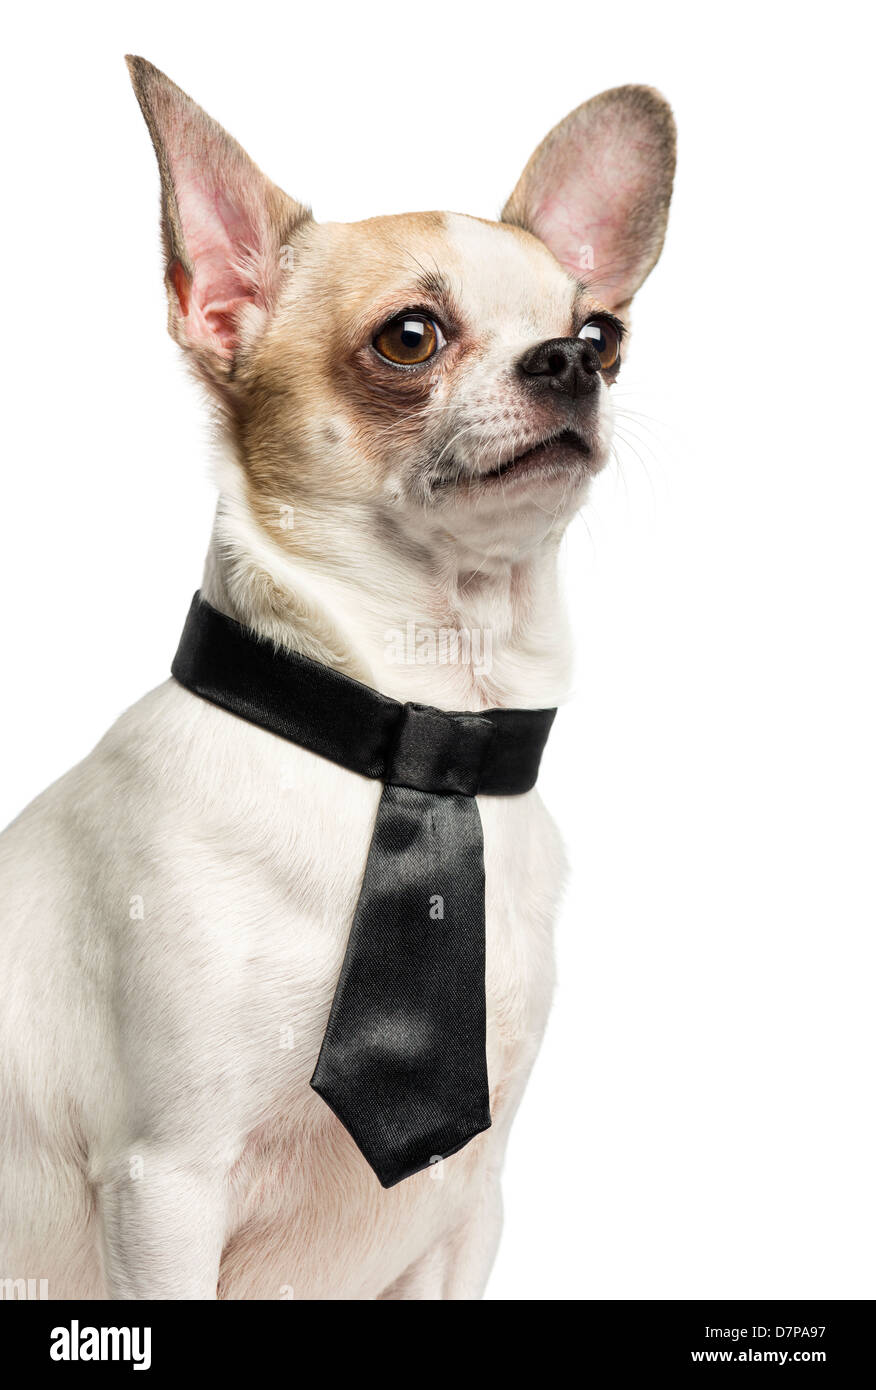 Chihuahua, 2 years old, wearing a tie against white background Stock Photo